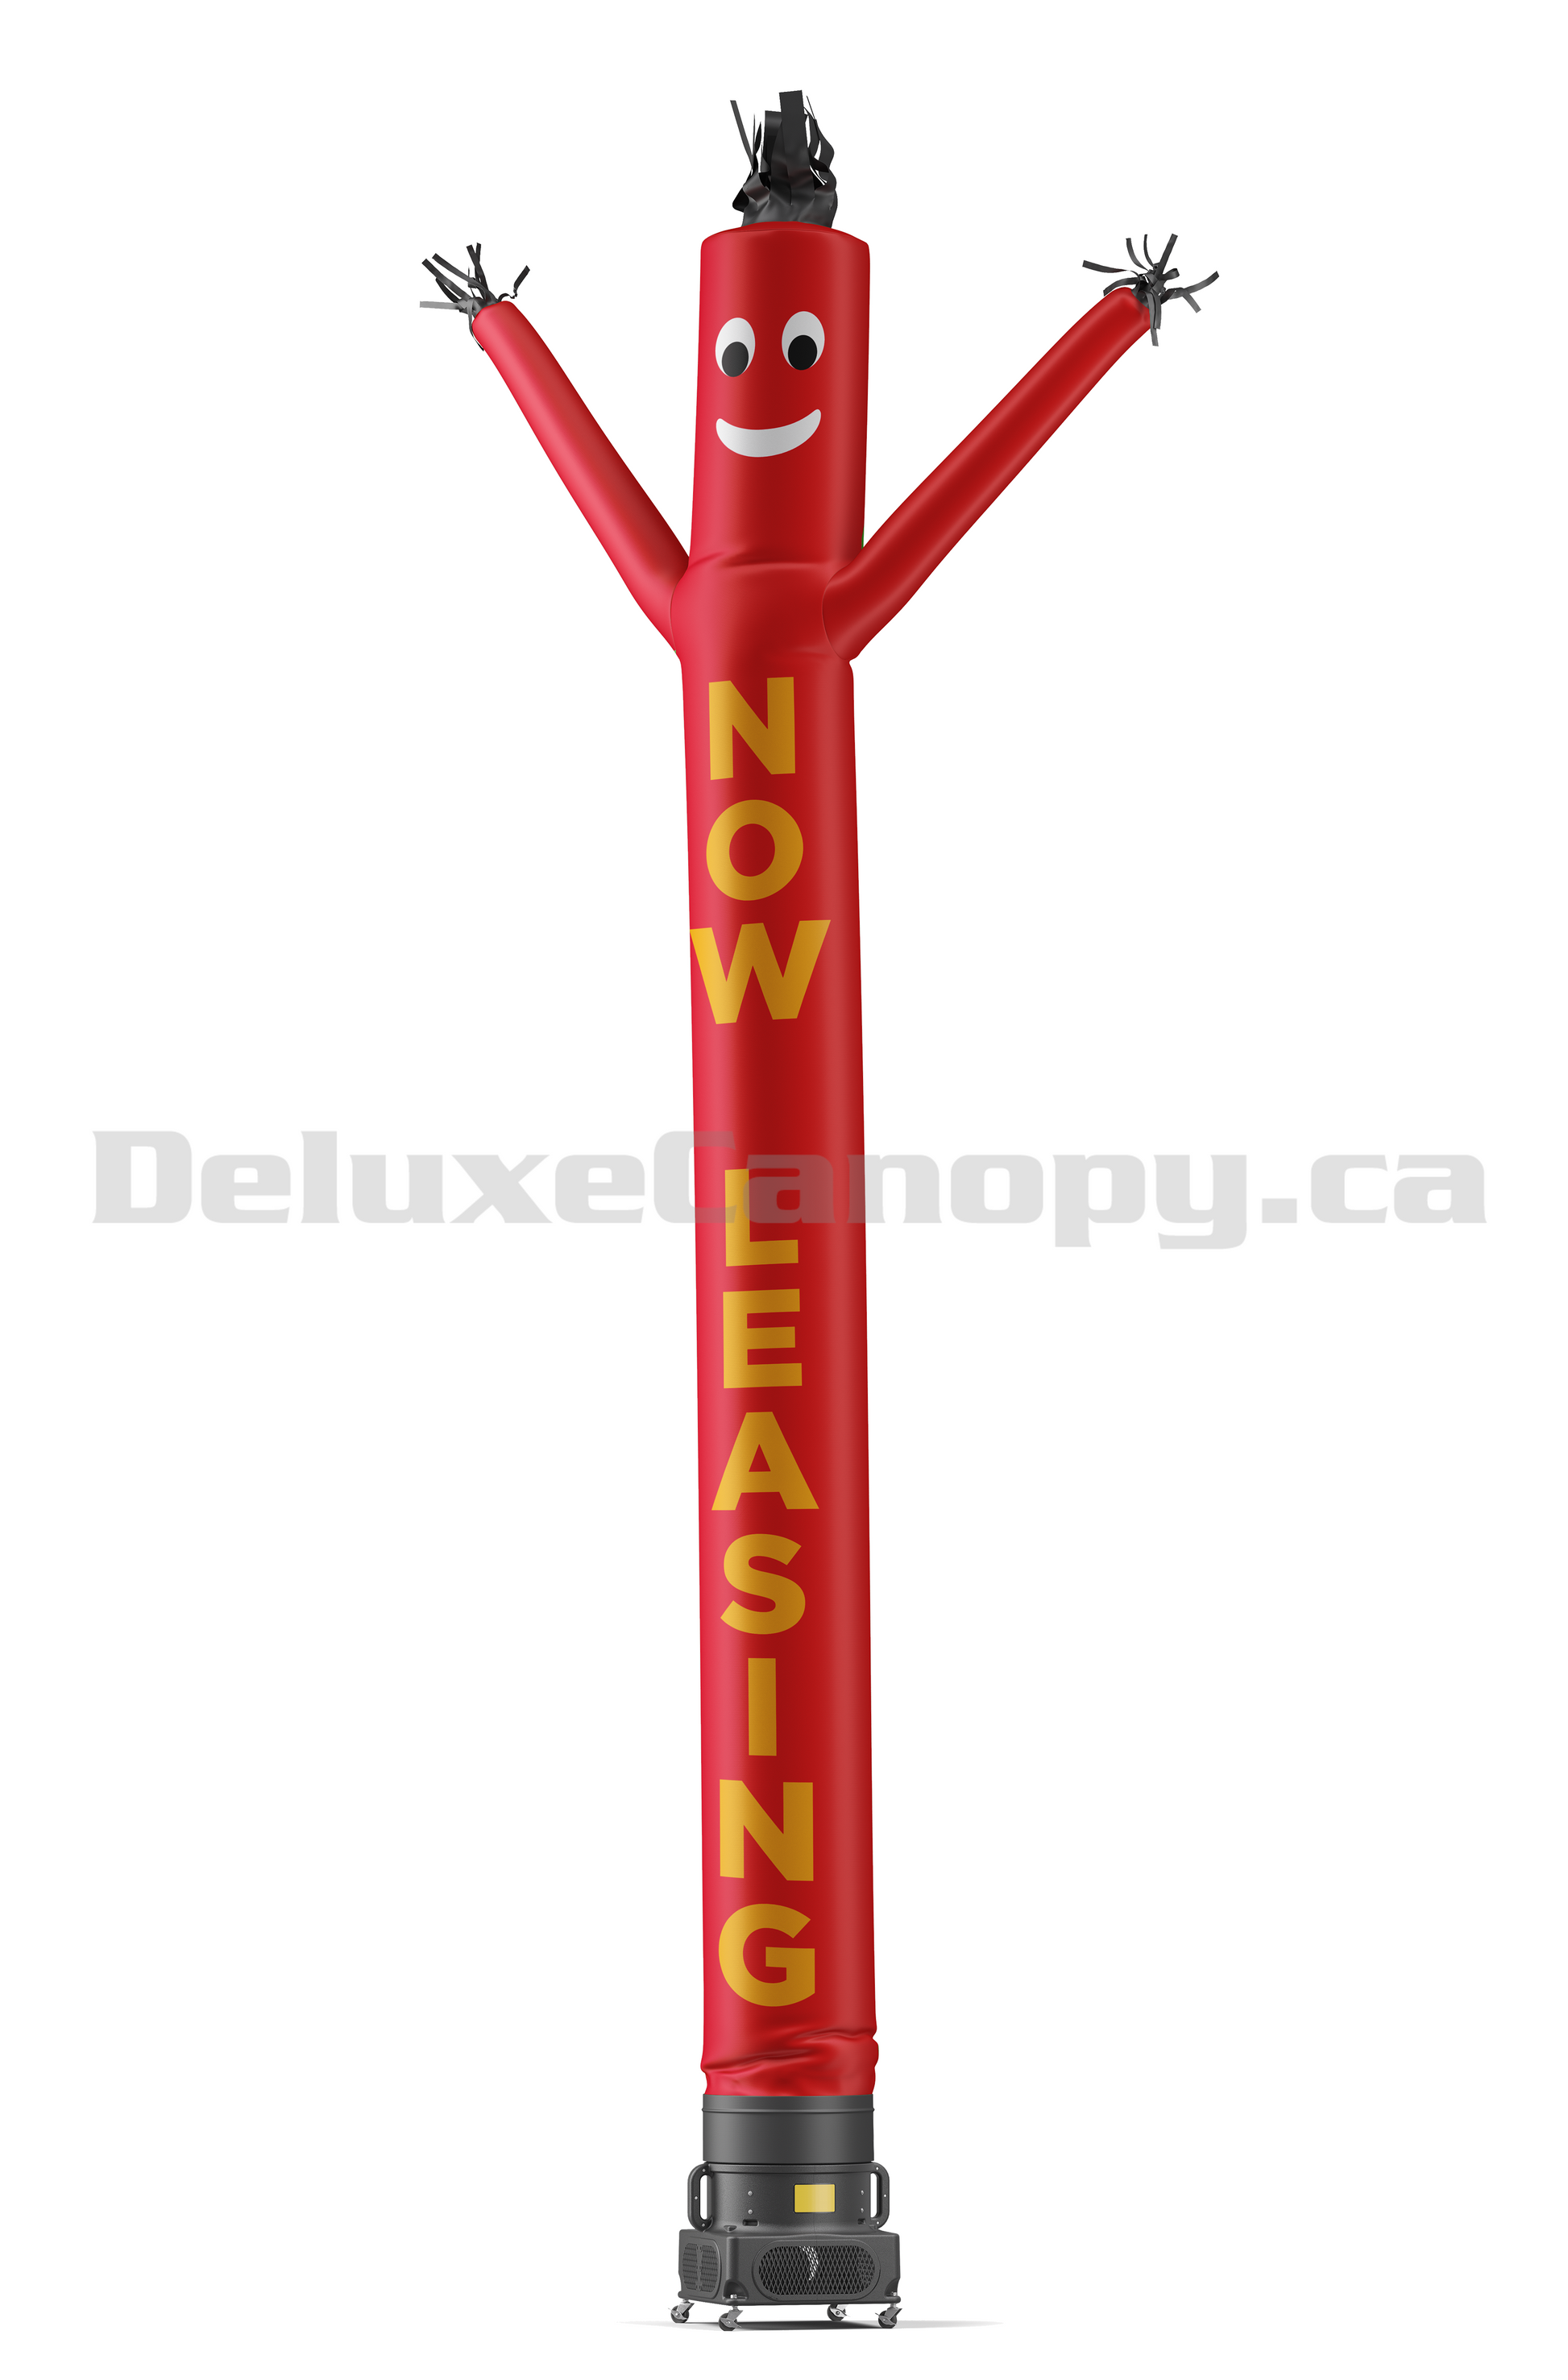 Check Cashing Air Dancers® Inflatable Tube Man Red with White Arms | Deluxe Canopy